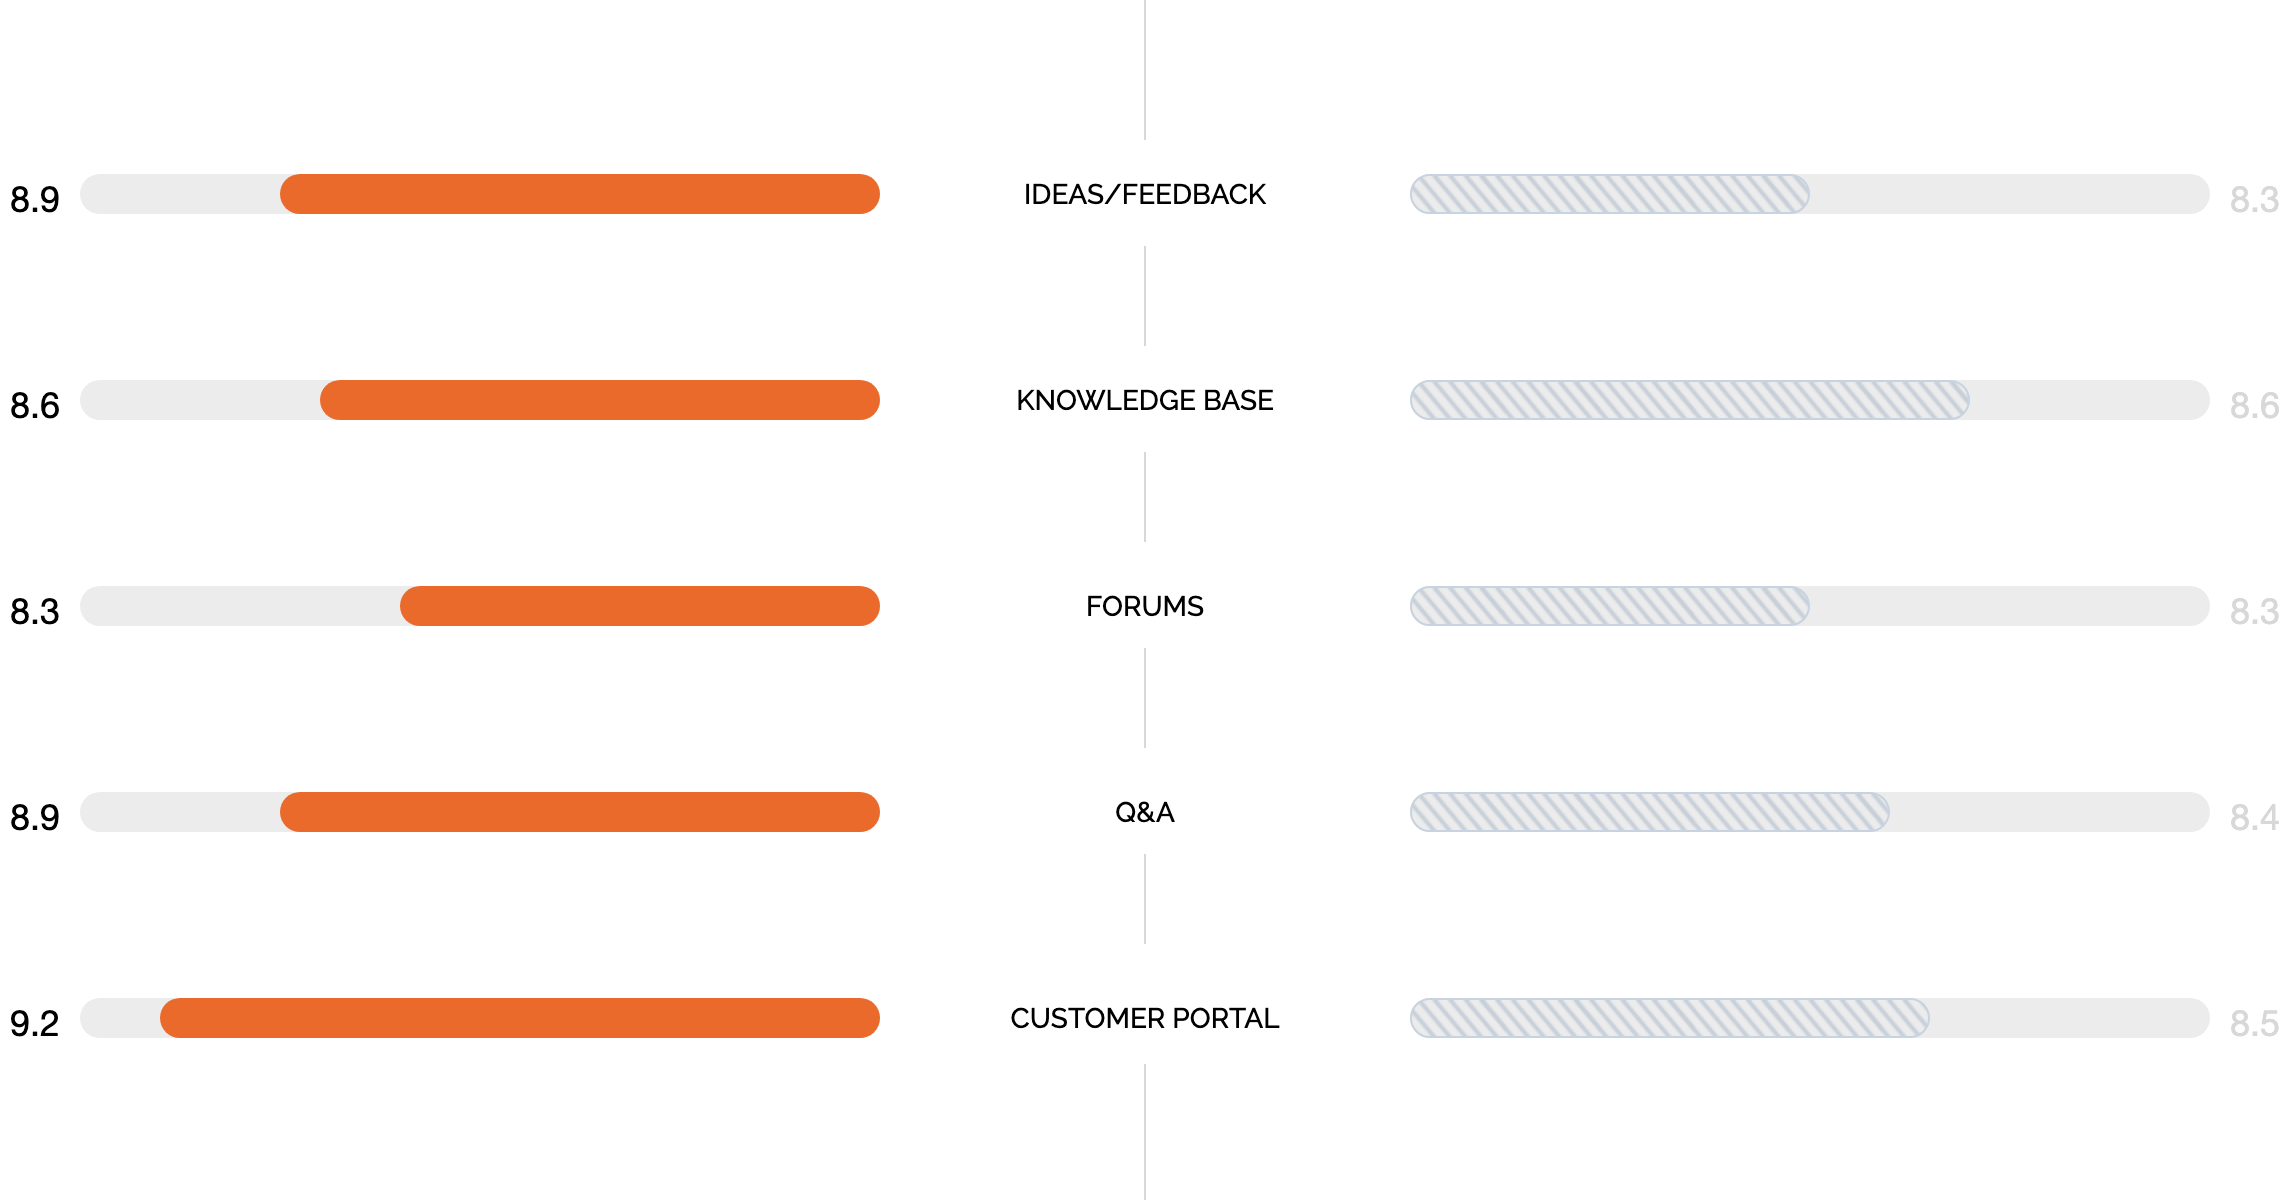 HappyFox vs Zendesk Support - Ideas and Feedback, Knowledge base, Forums, Q&A, and Customer Portal